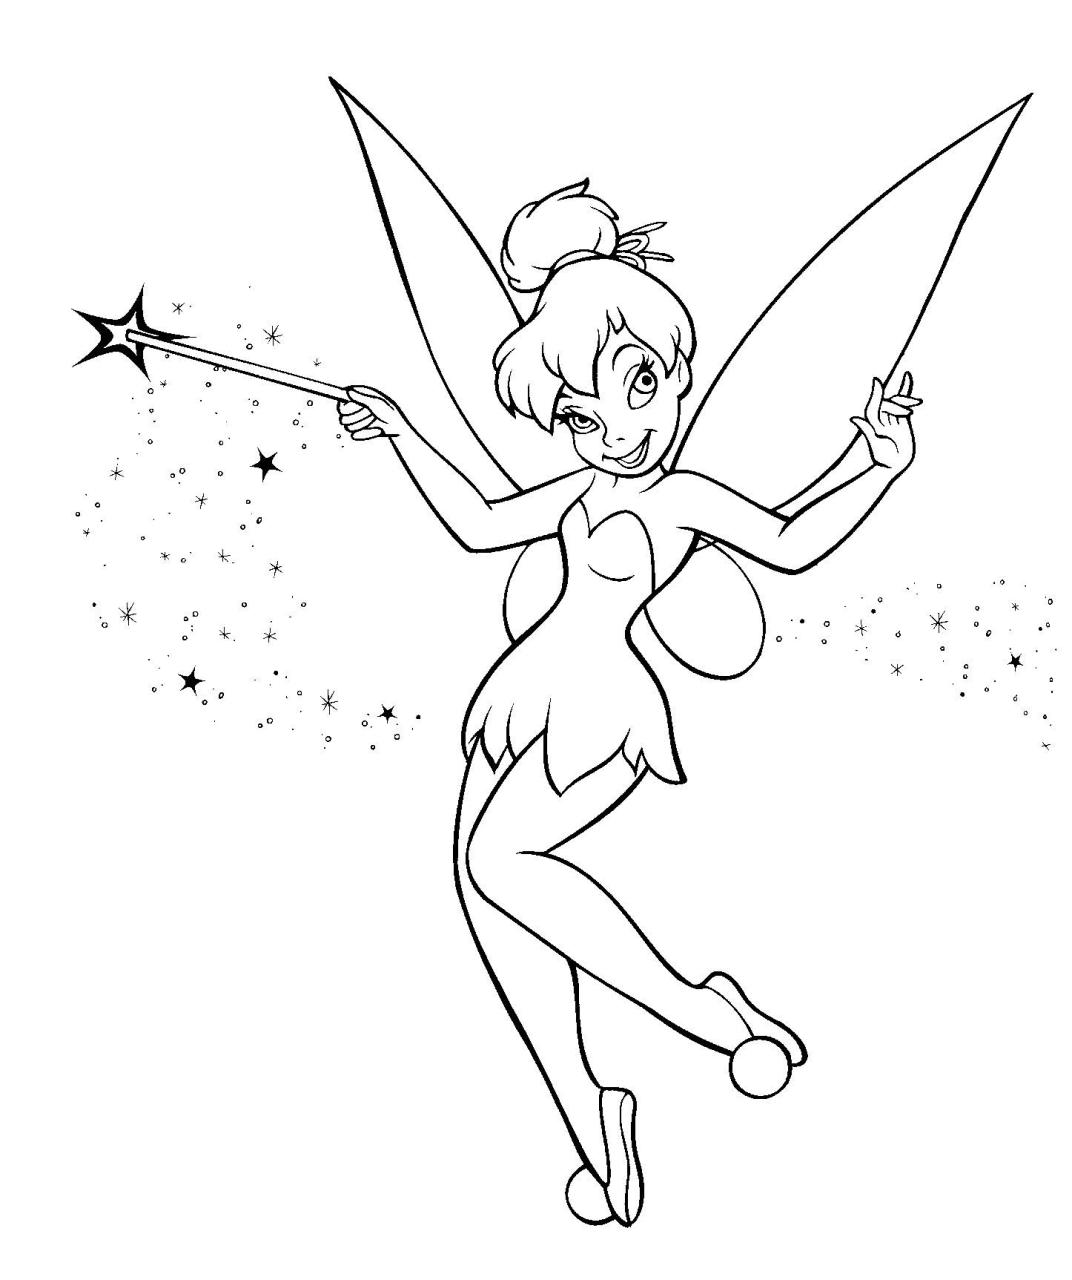 Tinkerbell Coloring Pages Tinkerbell coloring pages, Fairy coloring